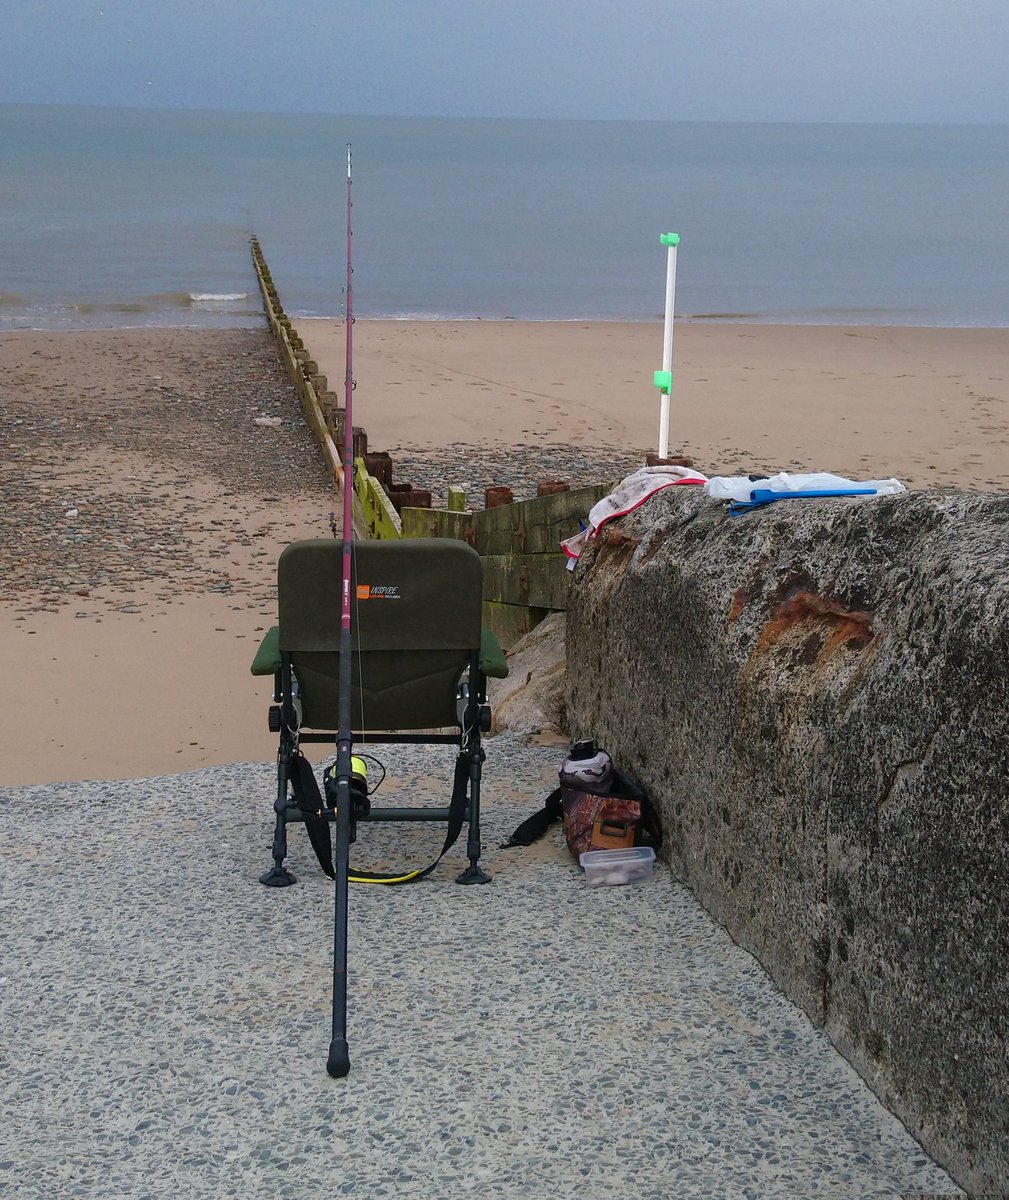 When hi tides 11:14hr, it's a reasonable tide, at 8.1m, it's a Saturday, warm & dry, but you're the only one out #fishing on the #fyldecoast you know you're on a hiding to nothing #blanking due to the easterly winds. But your day offs your day off🤷‍♂️🤞 🎣